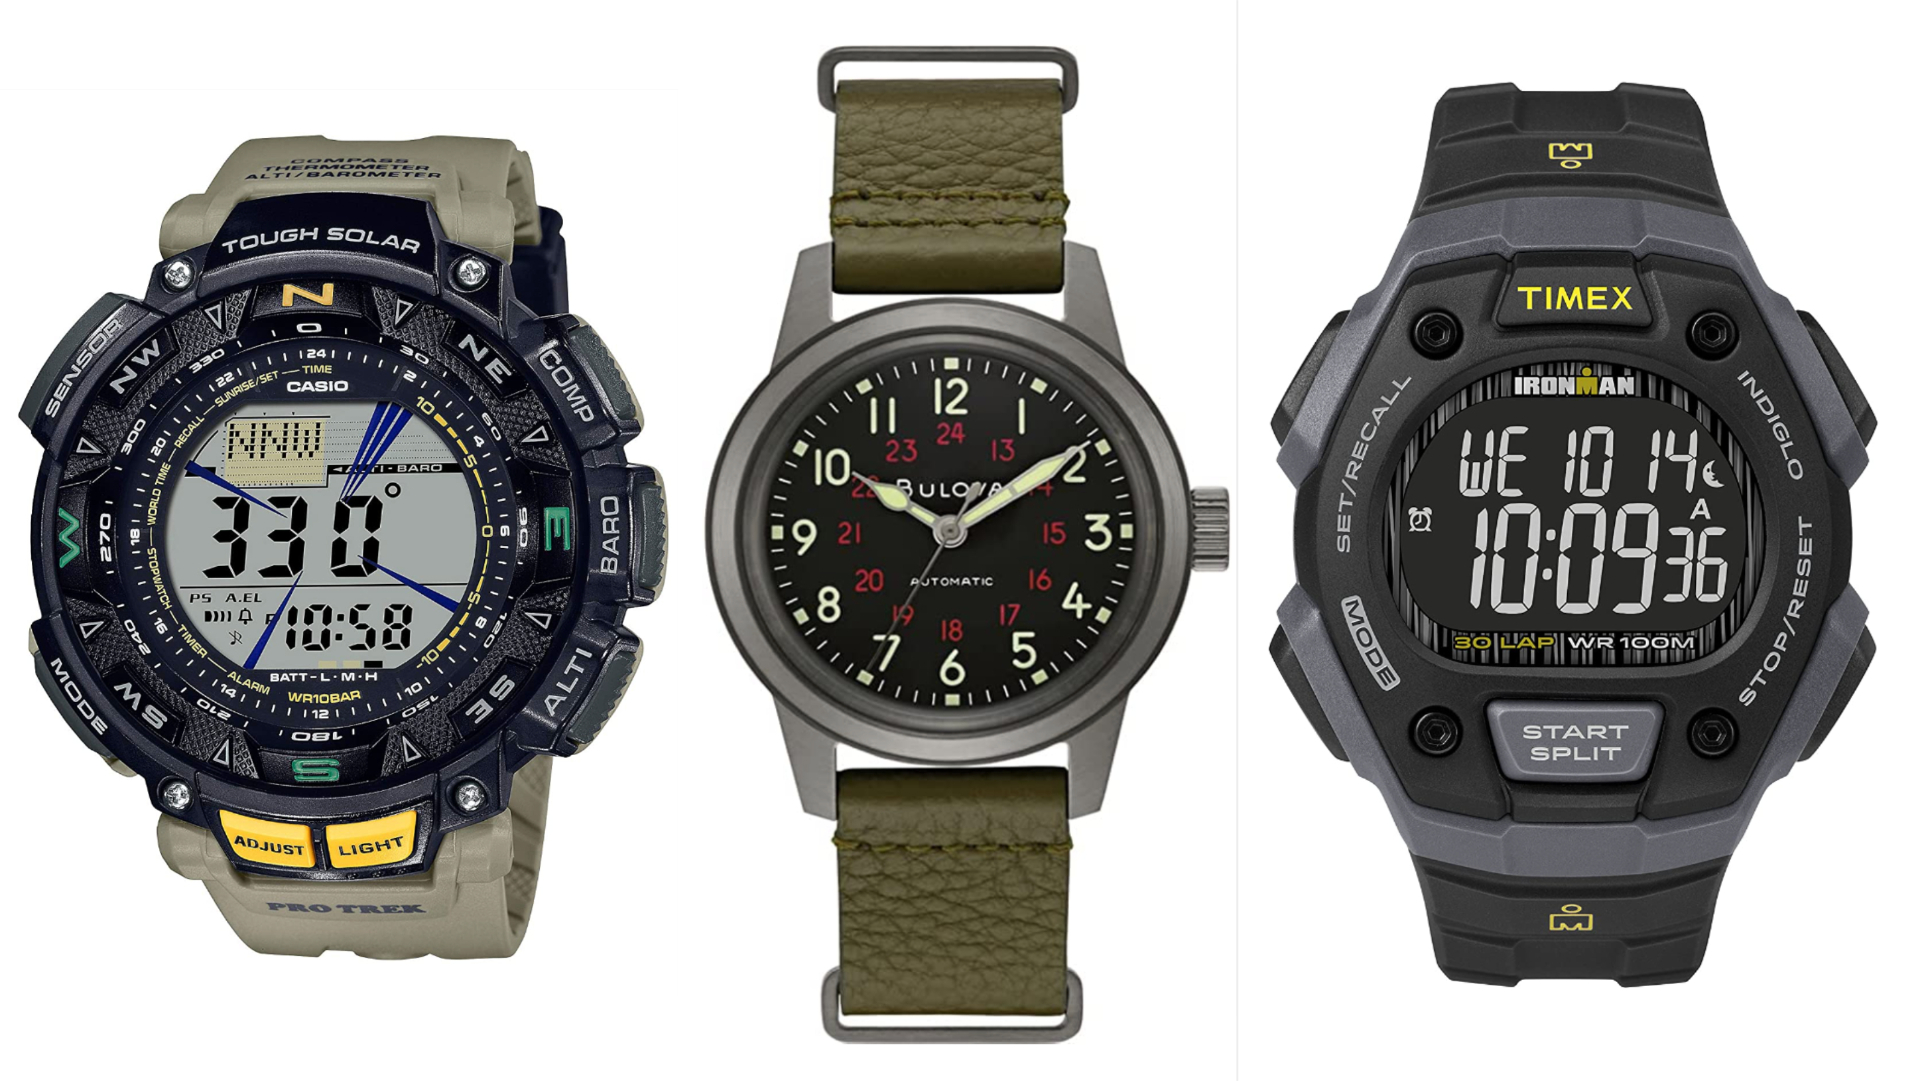 Score military watches for up to 50 percent off for Amazon Prime Day 2022